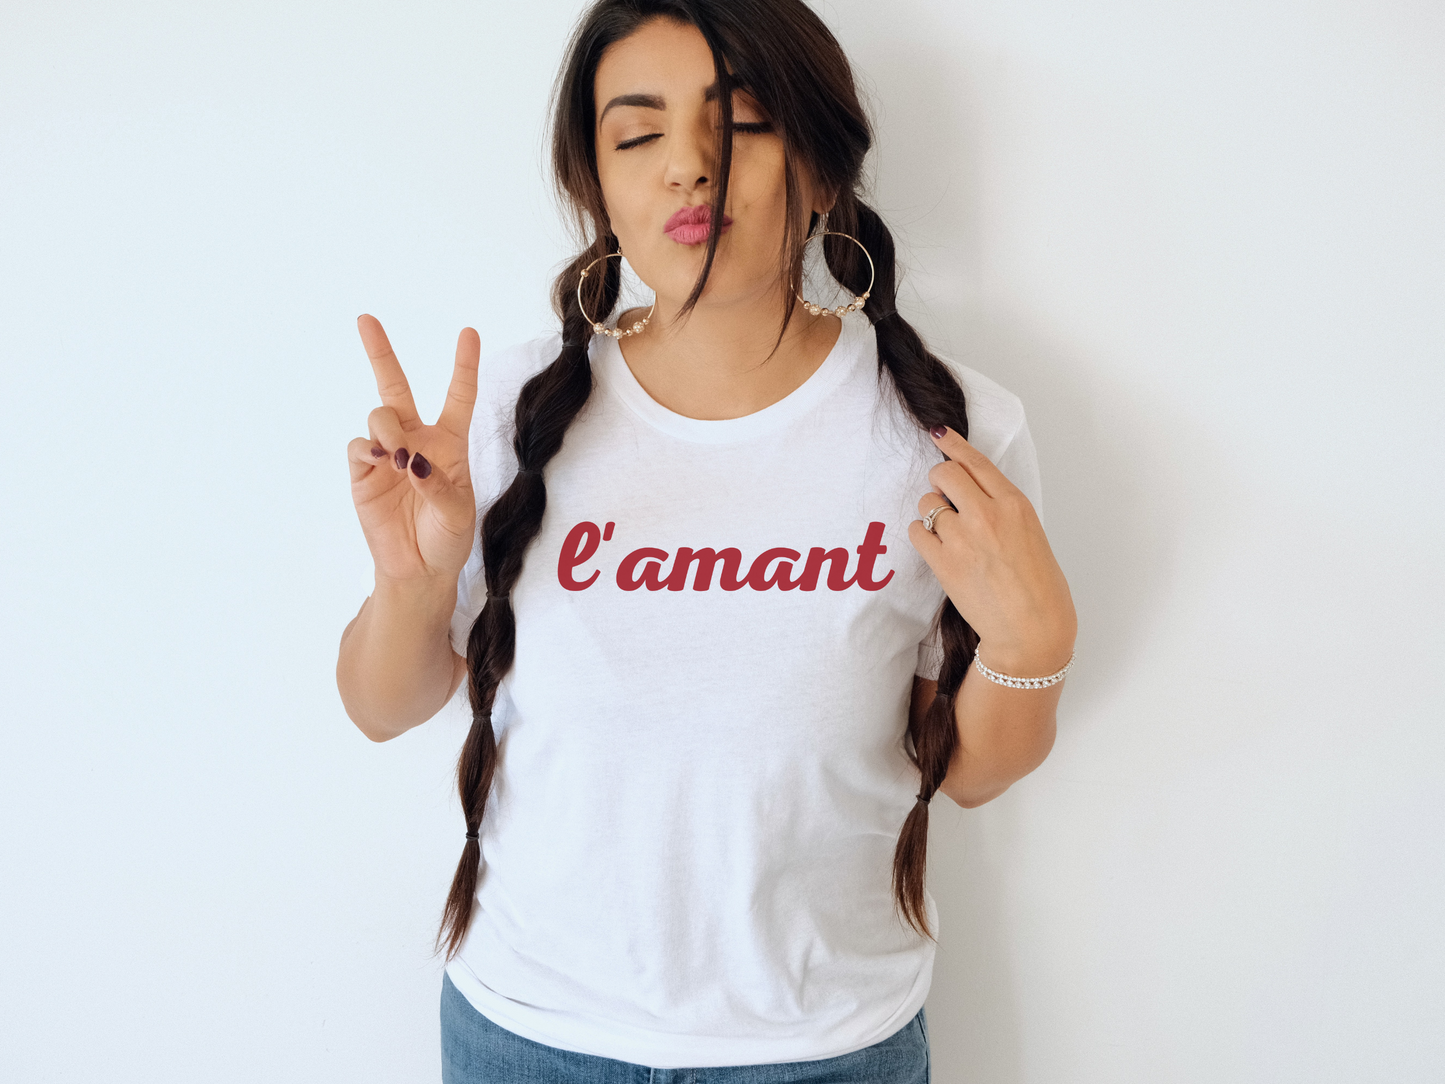 L'amant T-Shirt in White